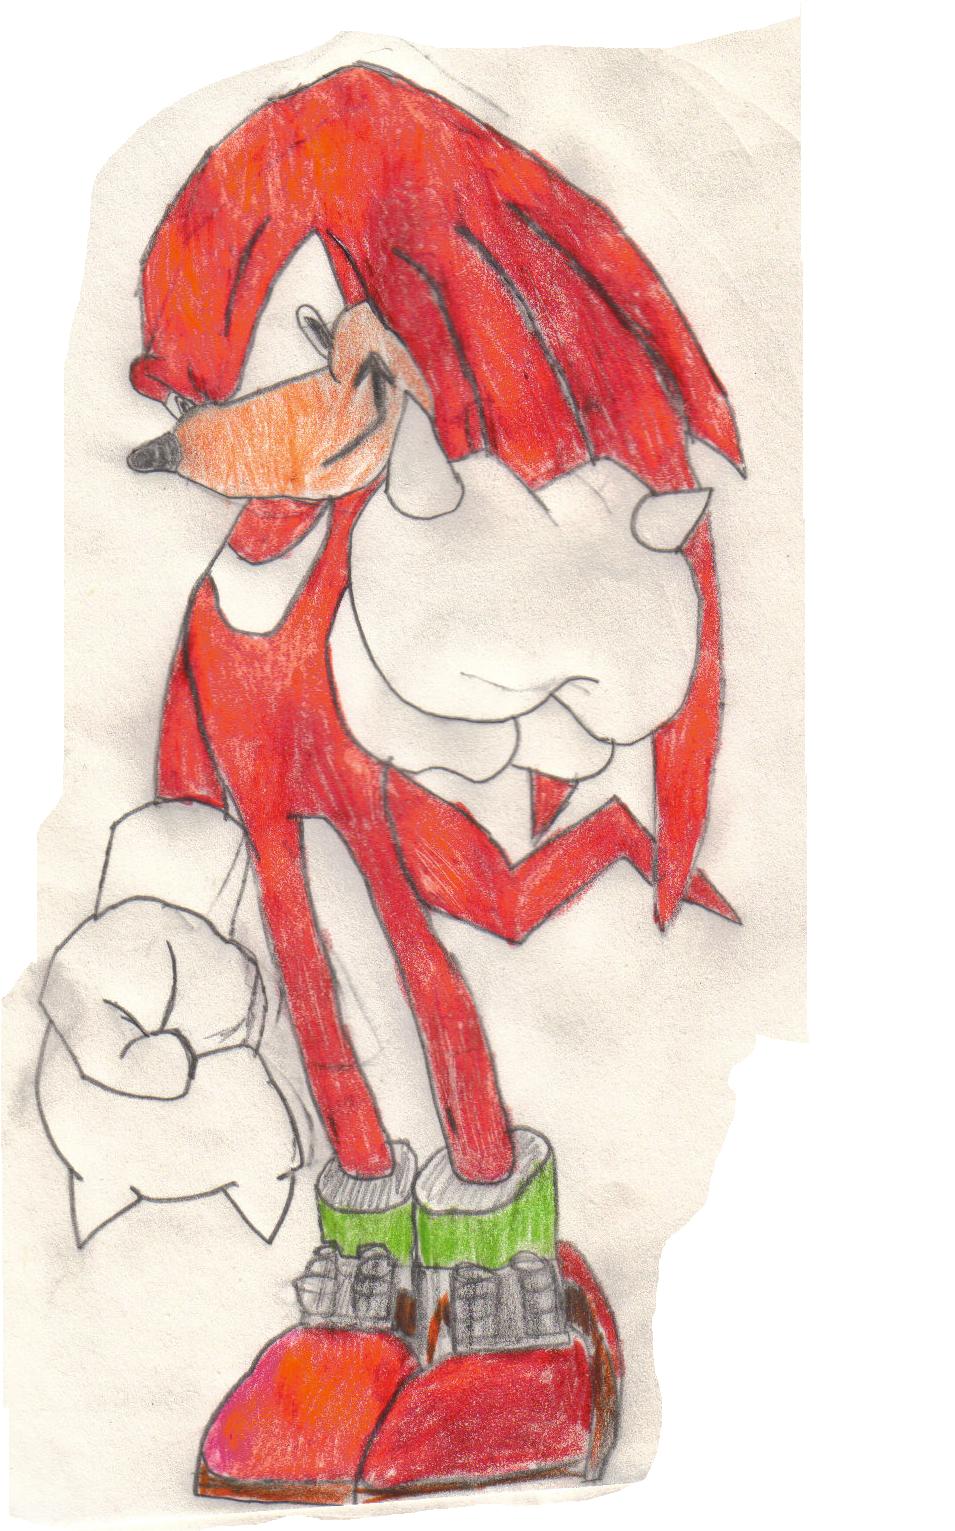 Knuckles by md91